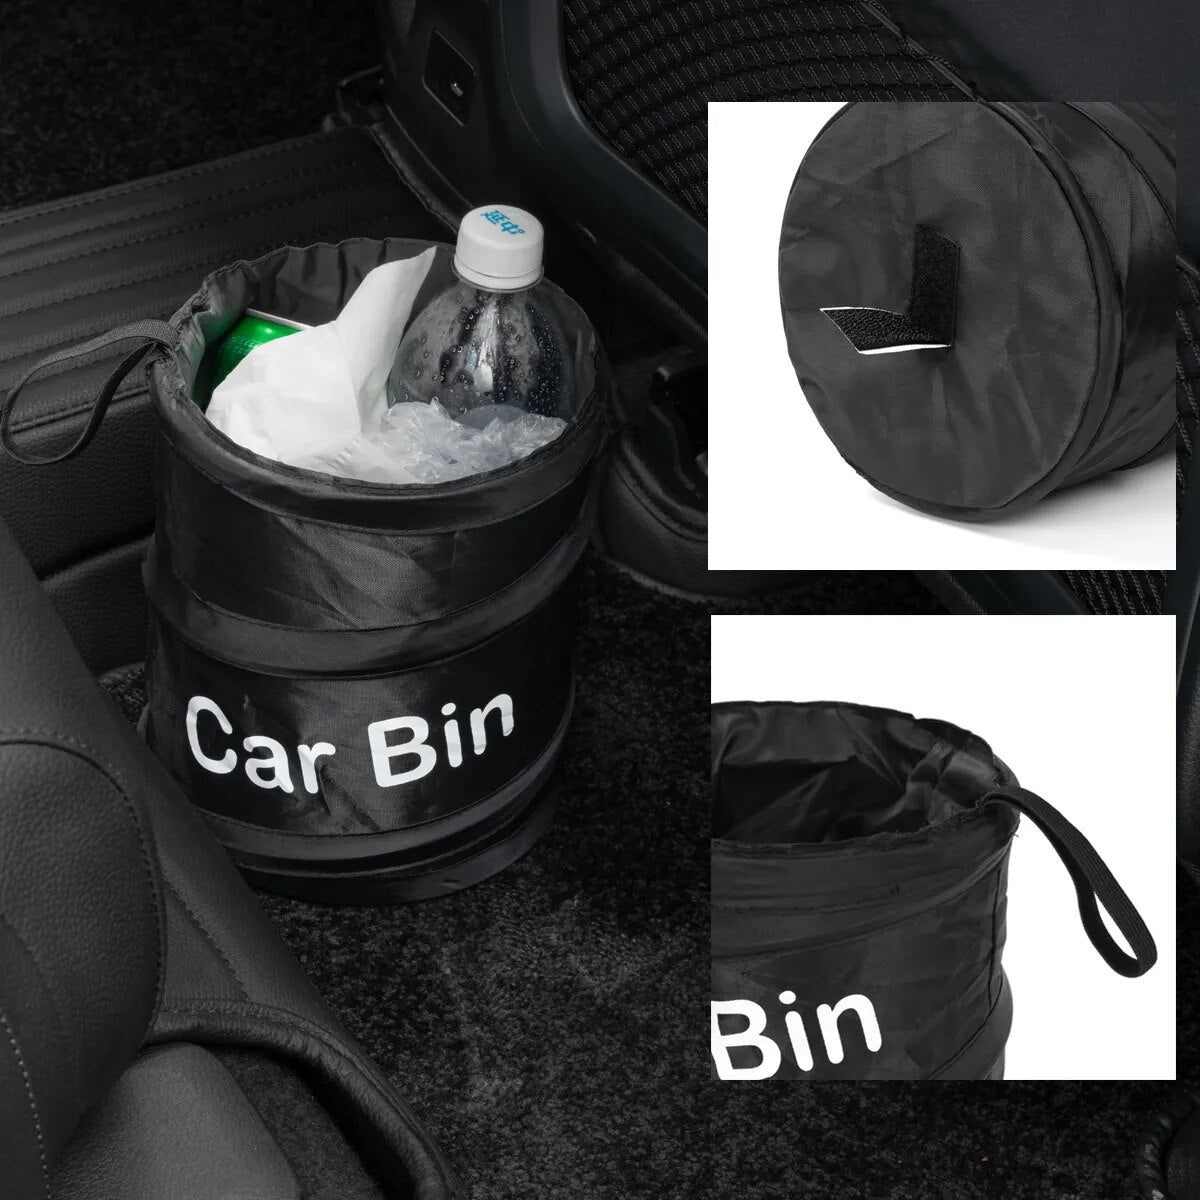 Collapsible Car Trash Can Pack | Keep Your Car Clean on the Go